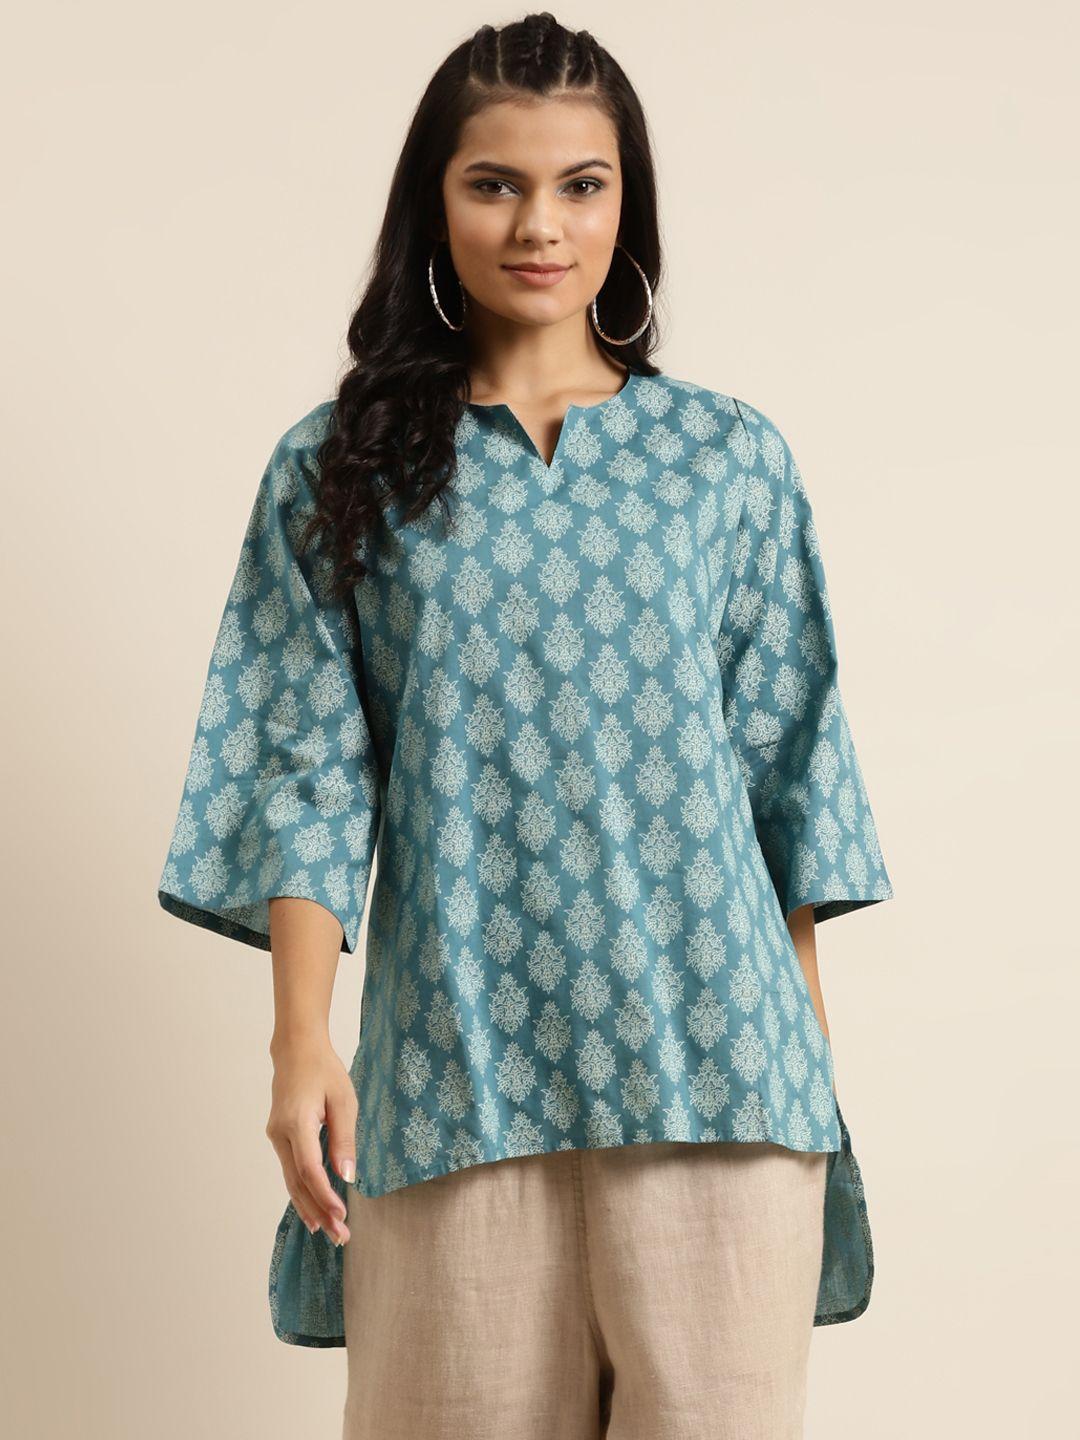 shae by sassafras blue & off-white pure cotton printed high-low straight kurti